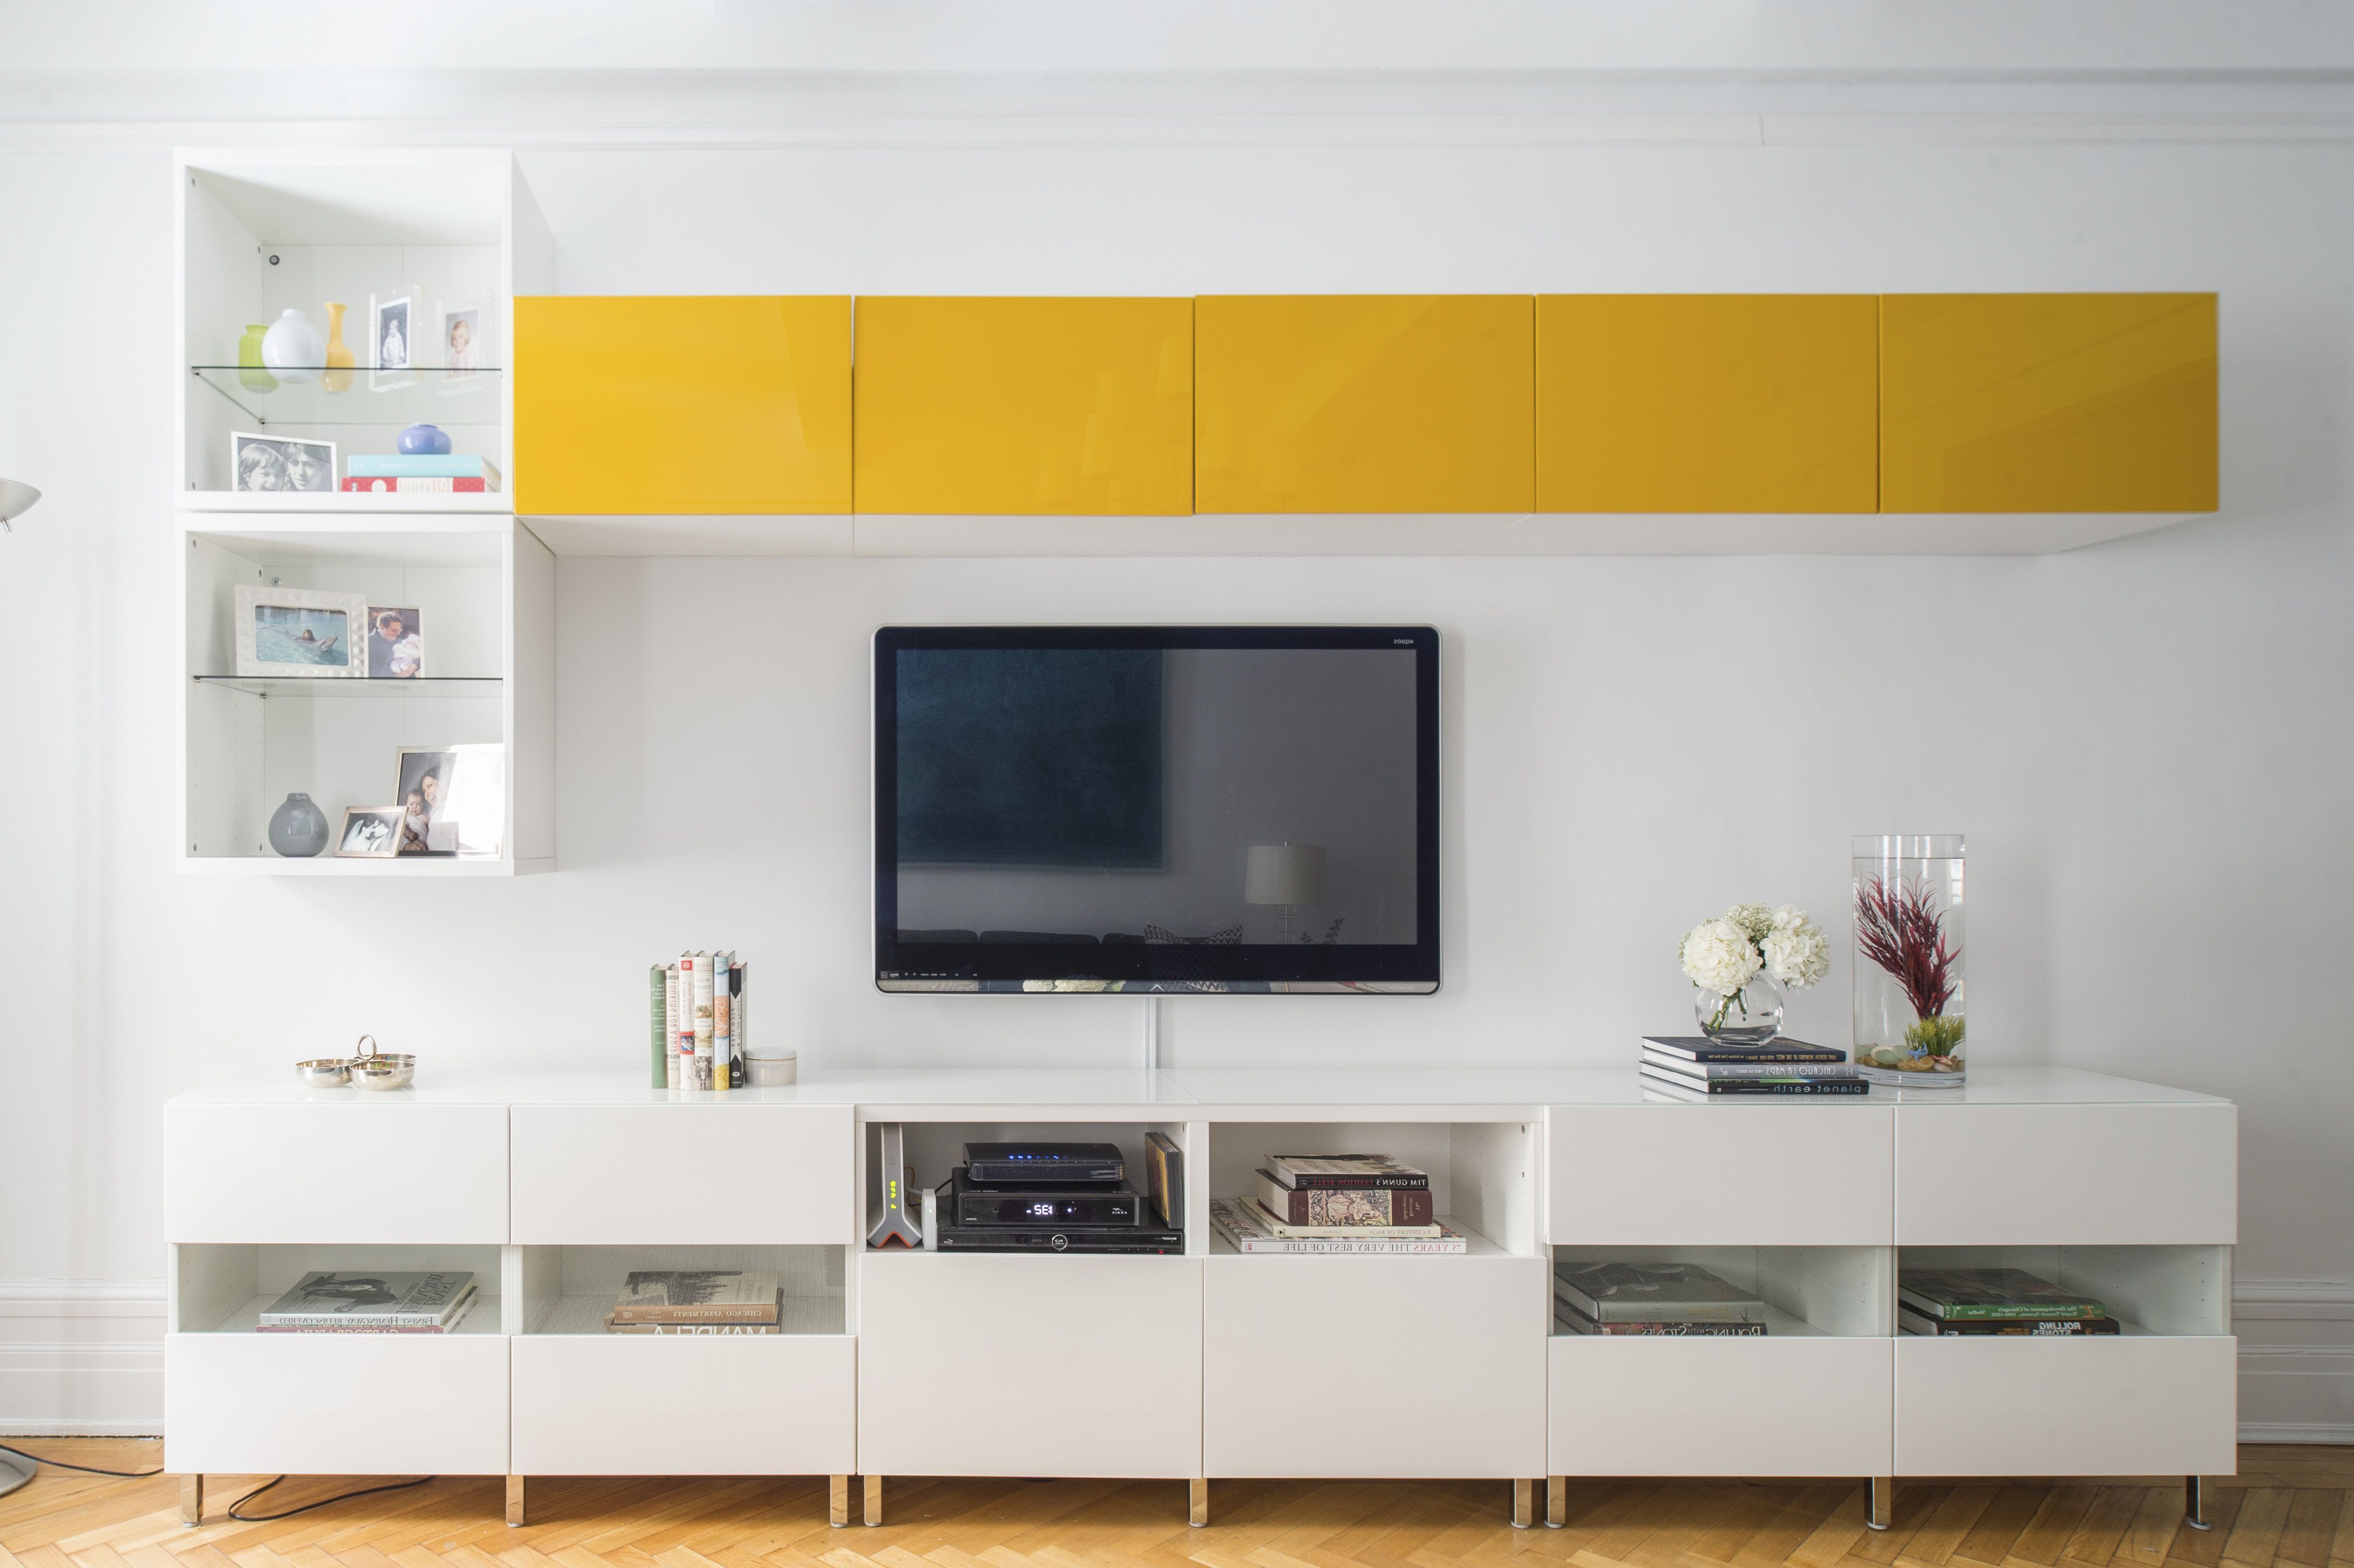 2017 Cozy Minimalist Flat Panel TV Showcase In White And Yellow Color (View 5 of 16)